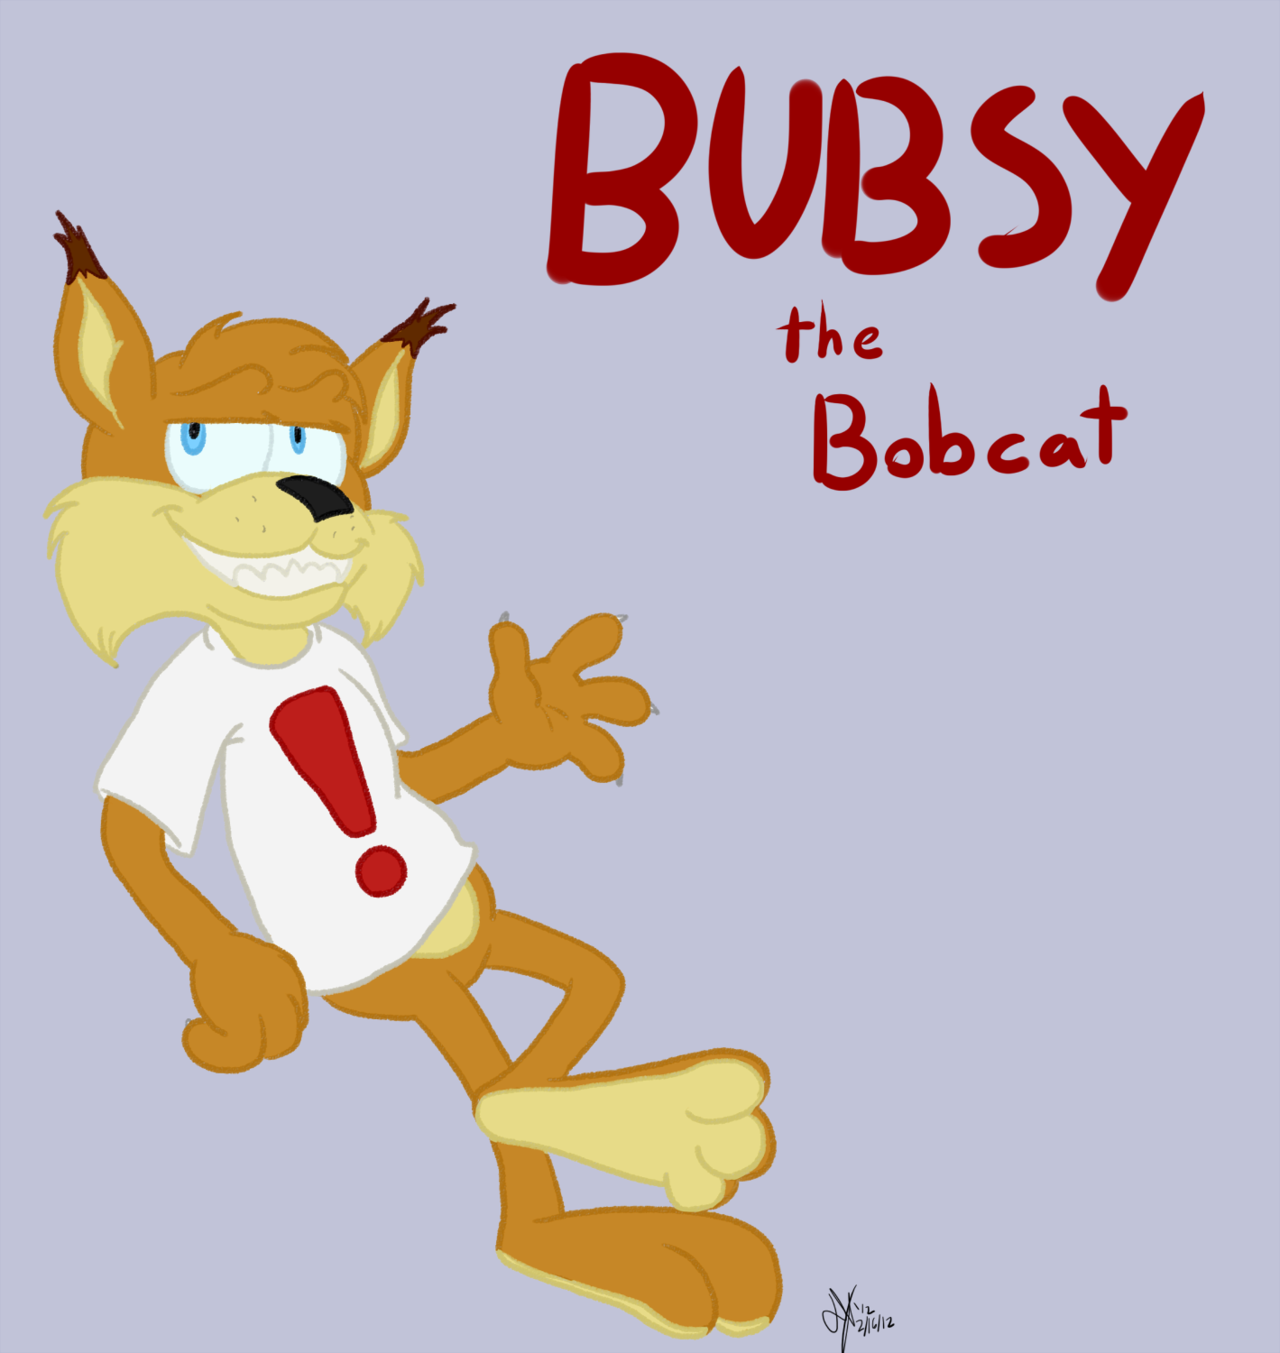 What could possibly go wrong? Anyone remember Bubsy the Bobcat? I had his first game